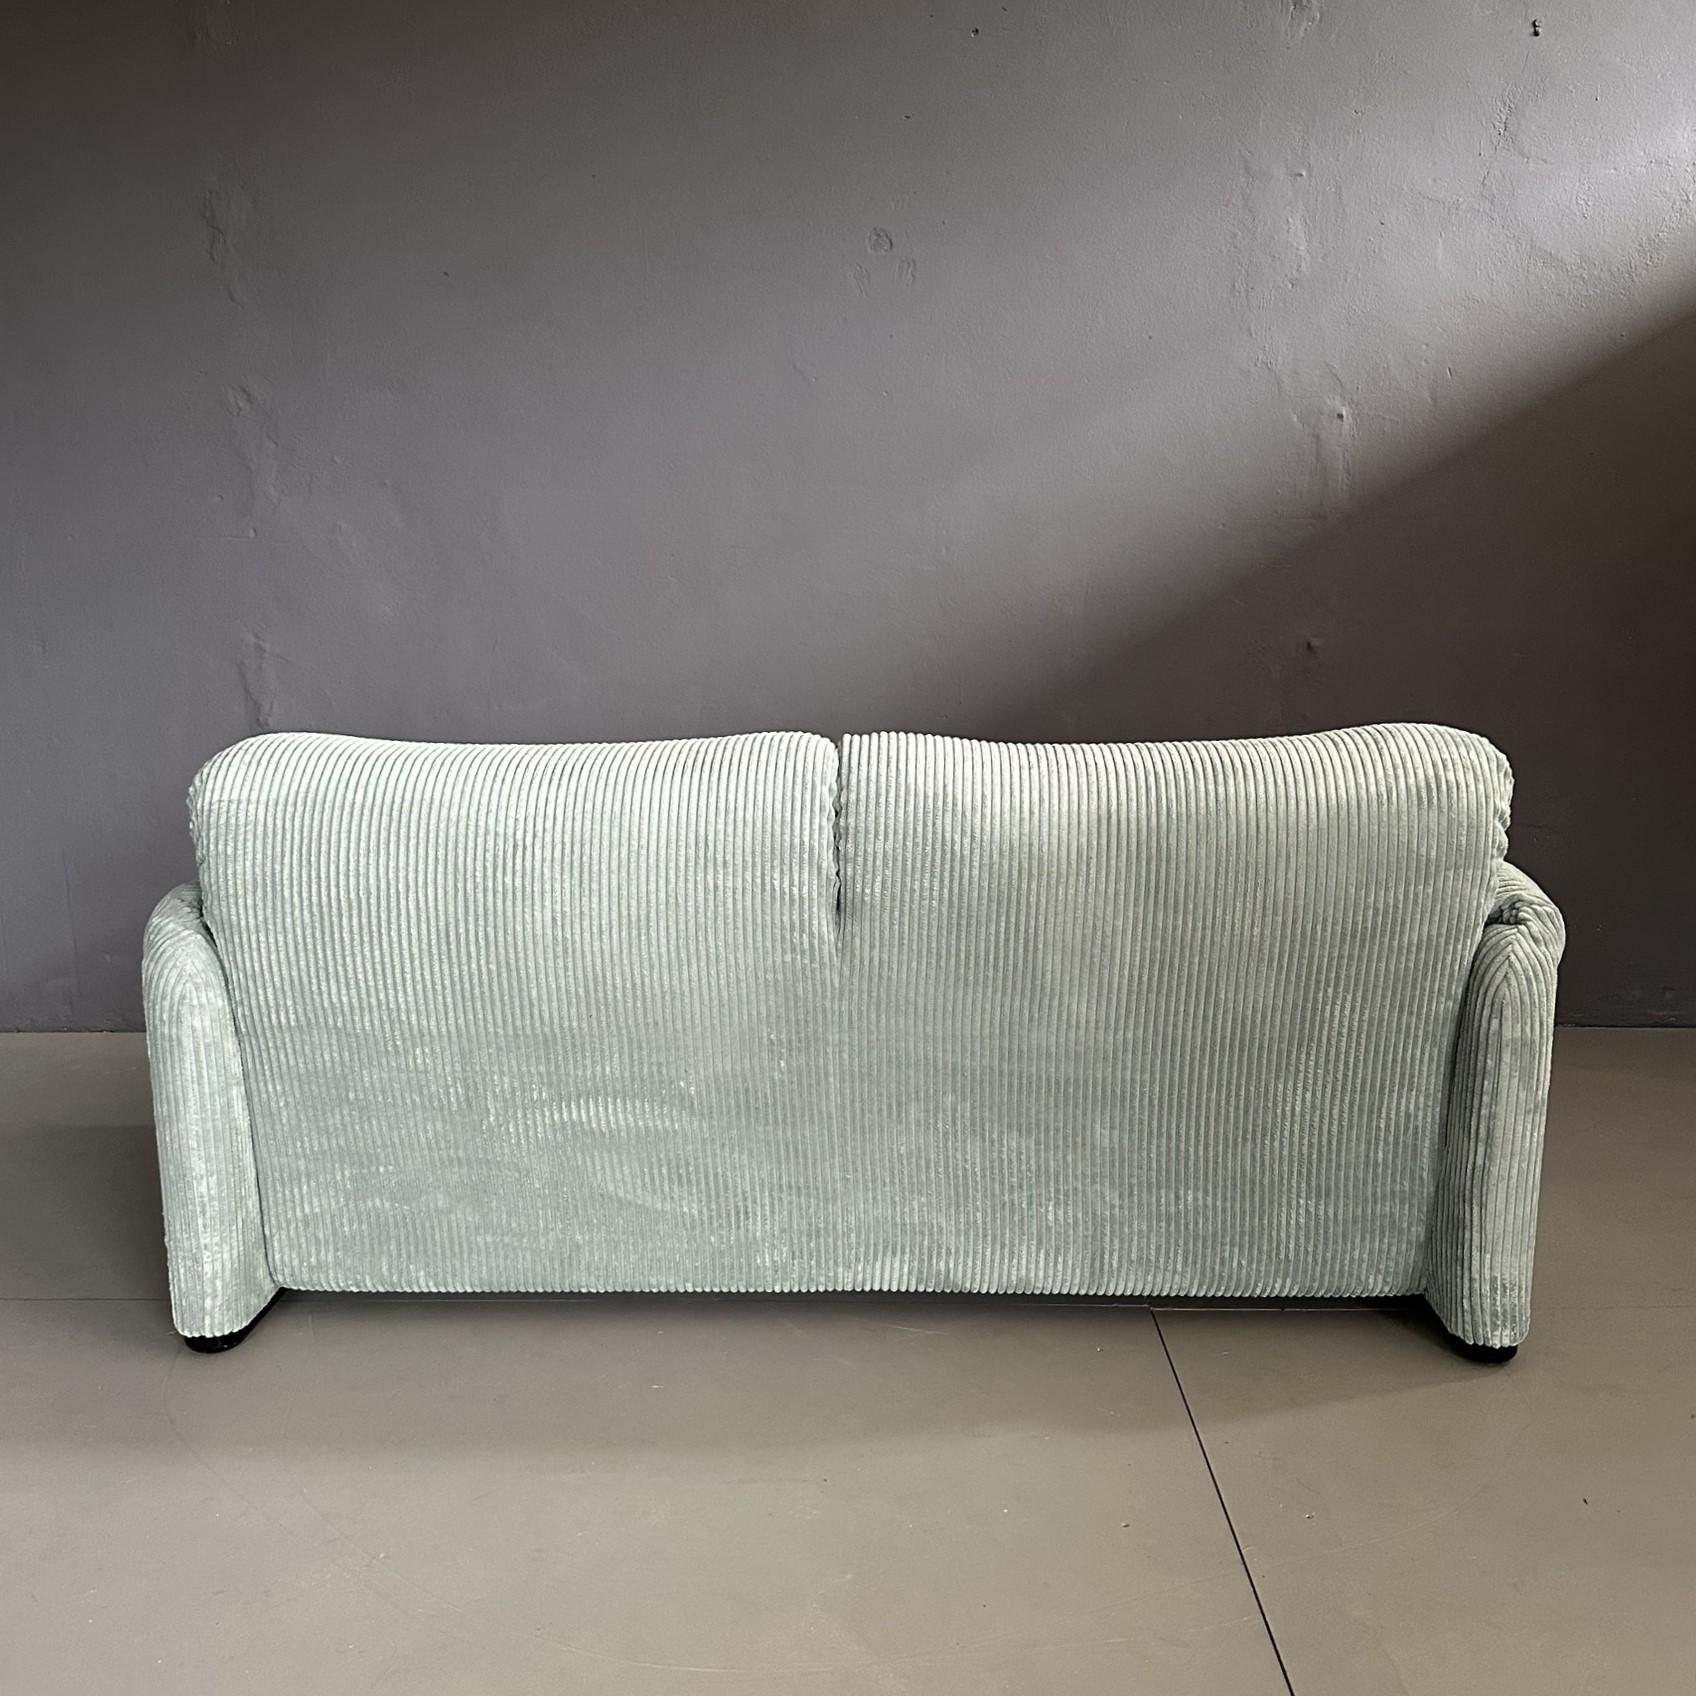 Fabric  Maralunga 2-seater sofa by Vico Magistretti for Cassina from the 70s For Sale